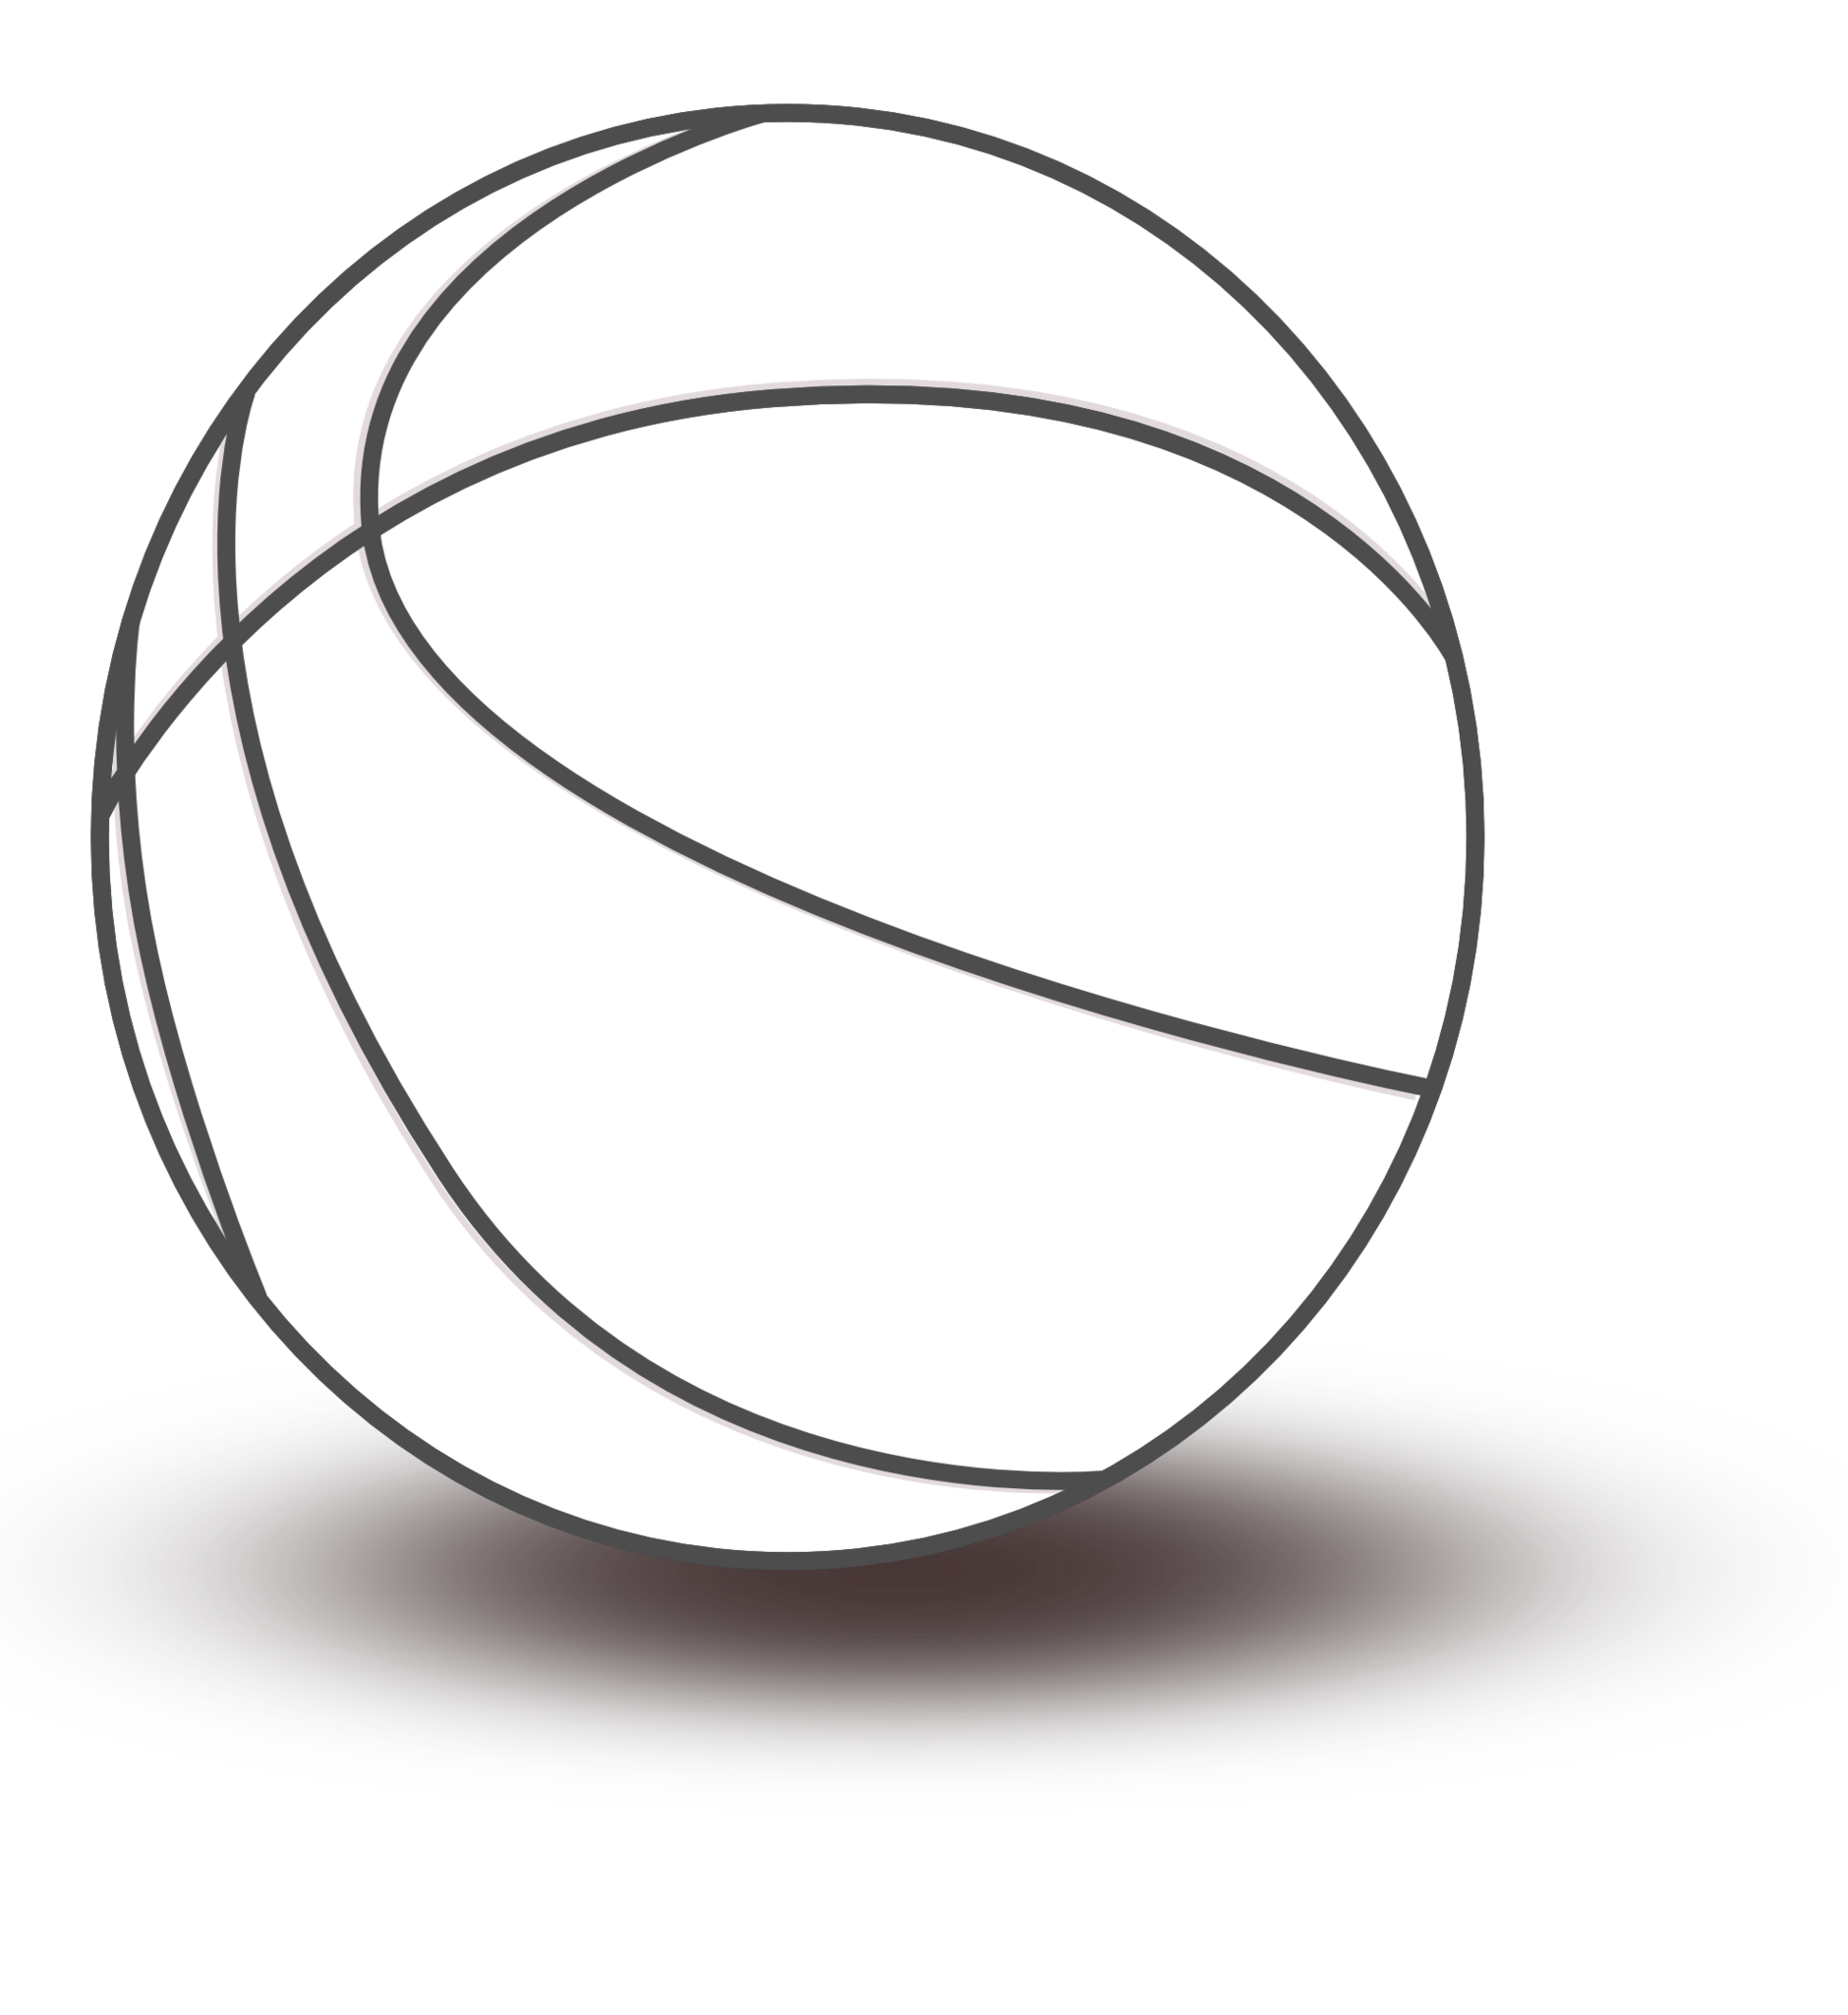 Basketball  black and white black and white basketball pictures clipart free to use clip art